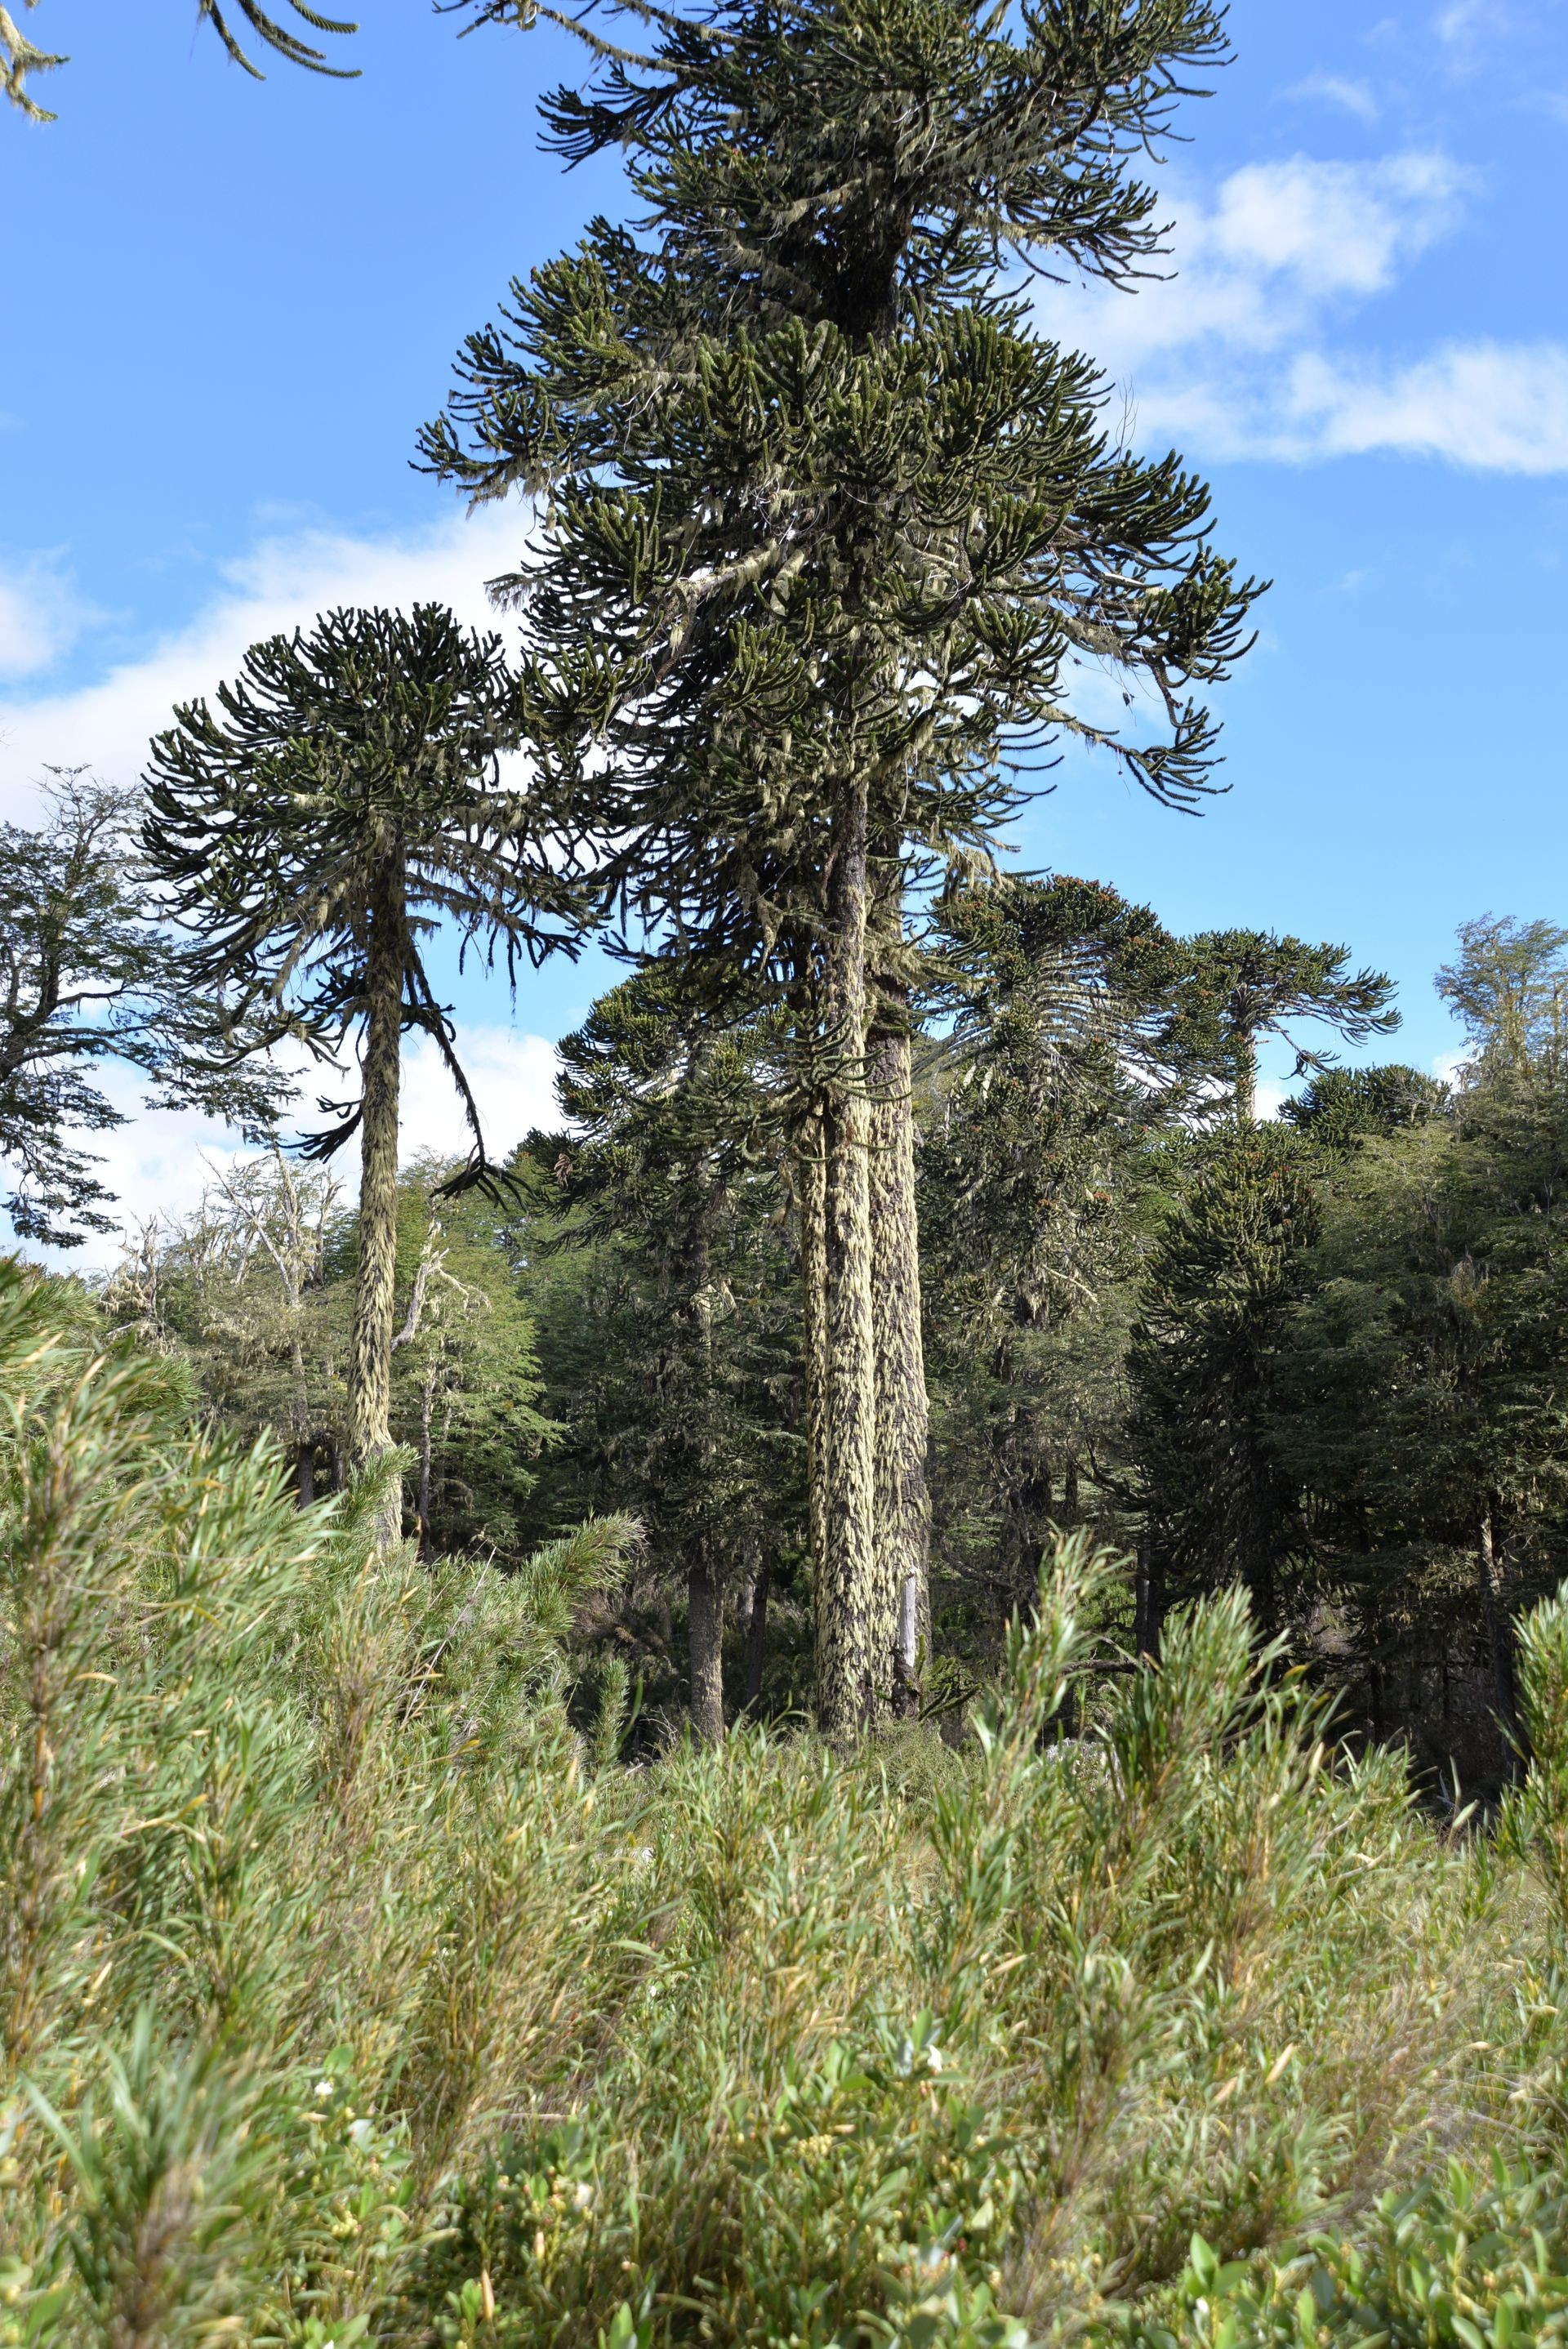 Araucaria. A tree native to Chile that can grow to over one thousand years old.